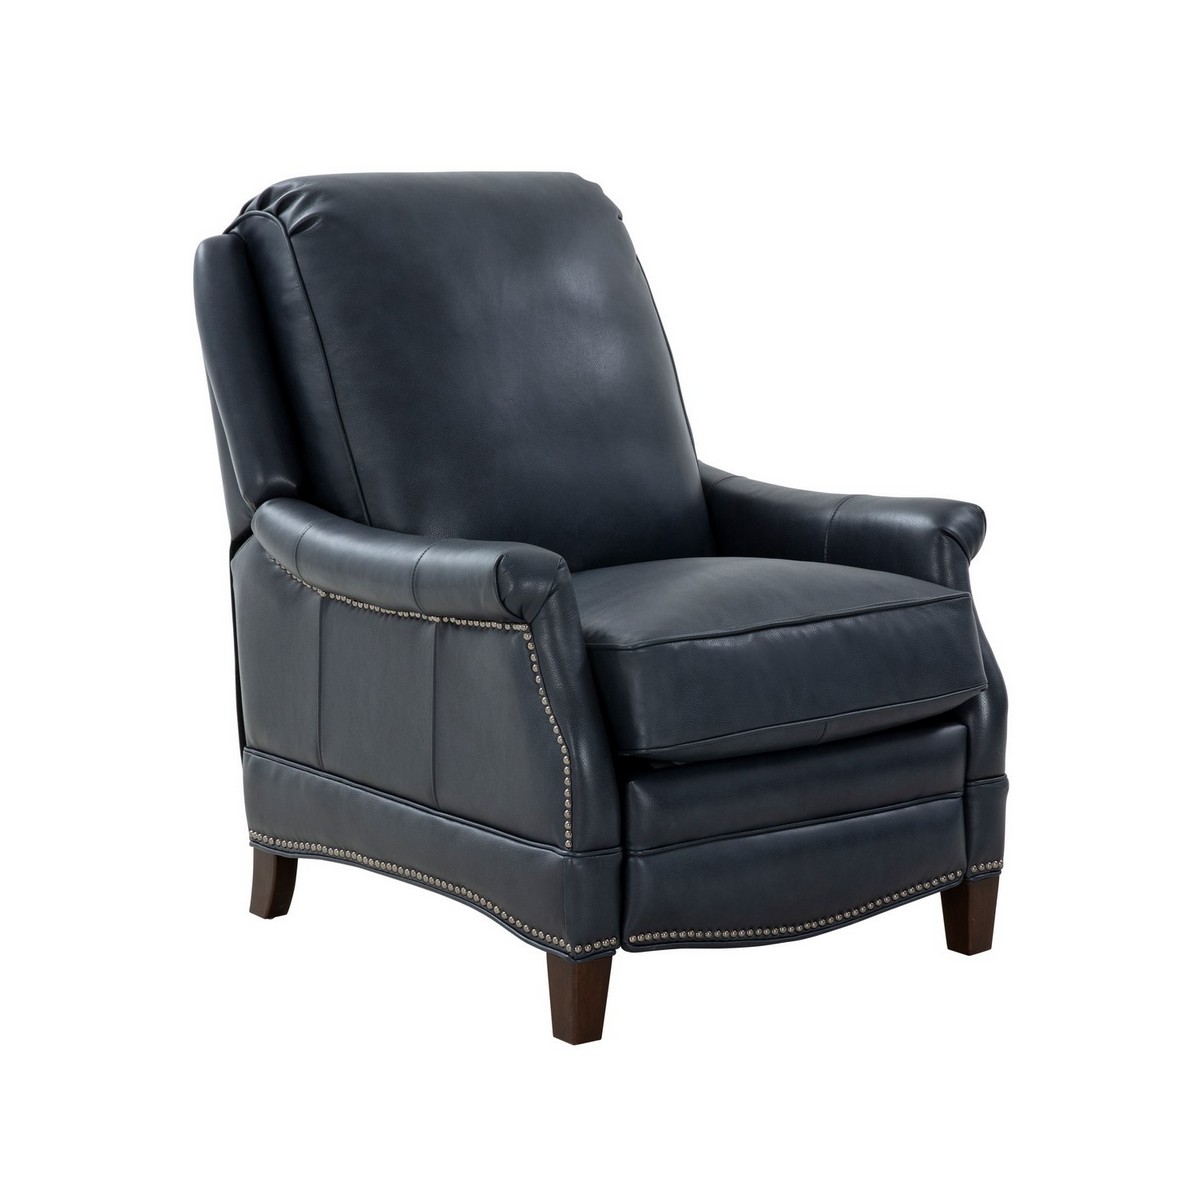 Barcalounger Ashebrooke Recliner Chair - Barone Navy Blue/All Leather